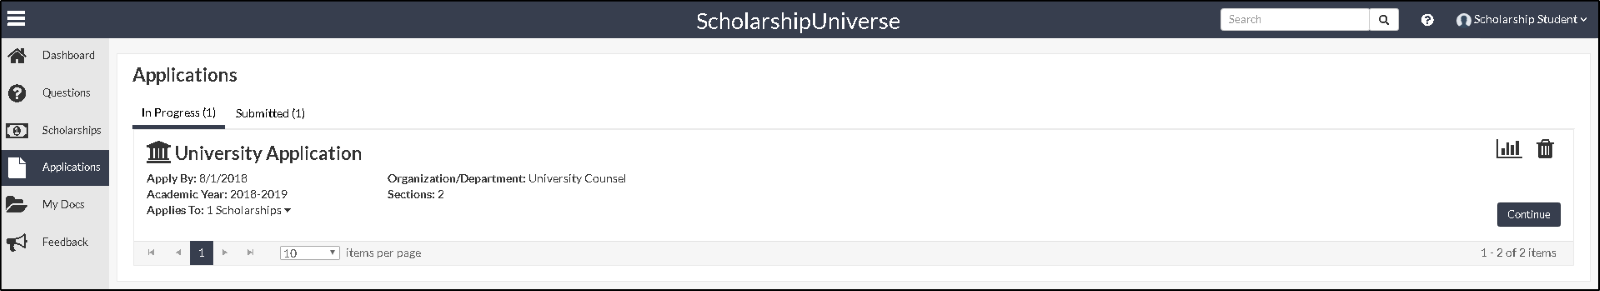 ScholarshipUniverse list of applications